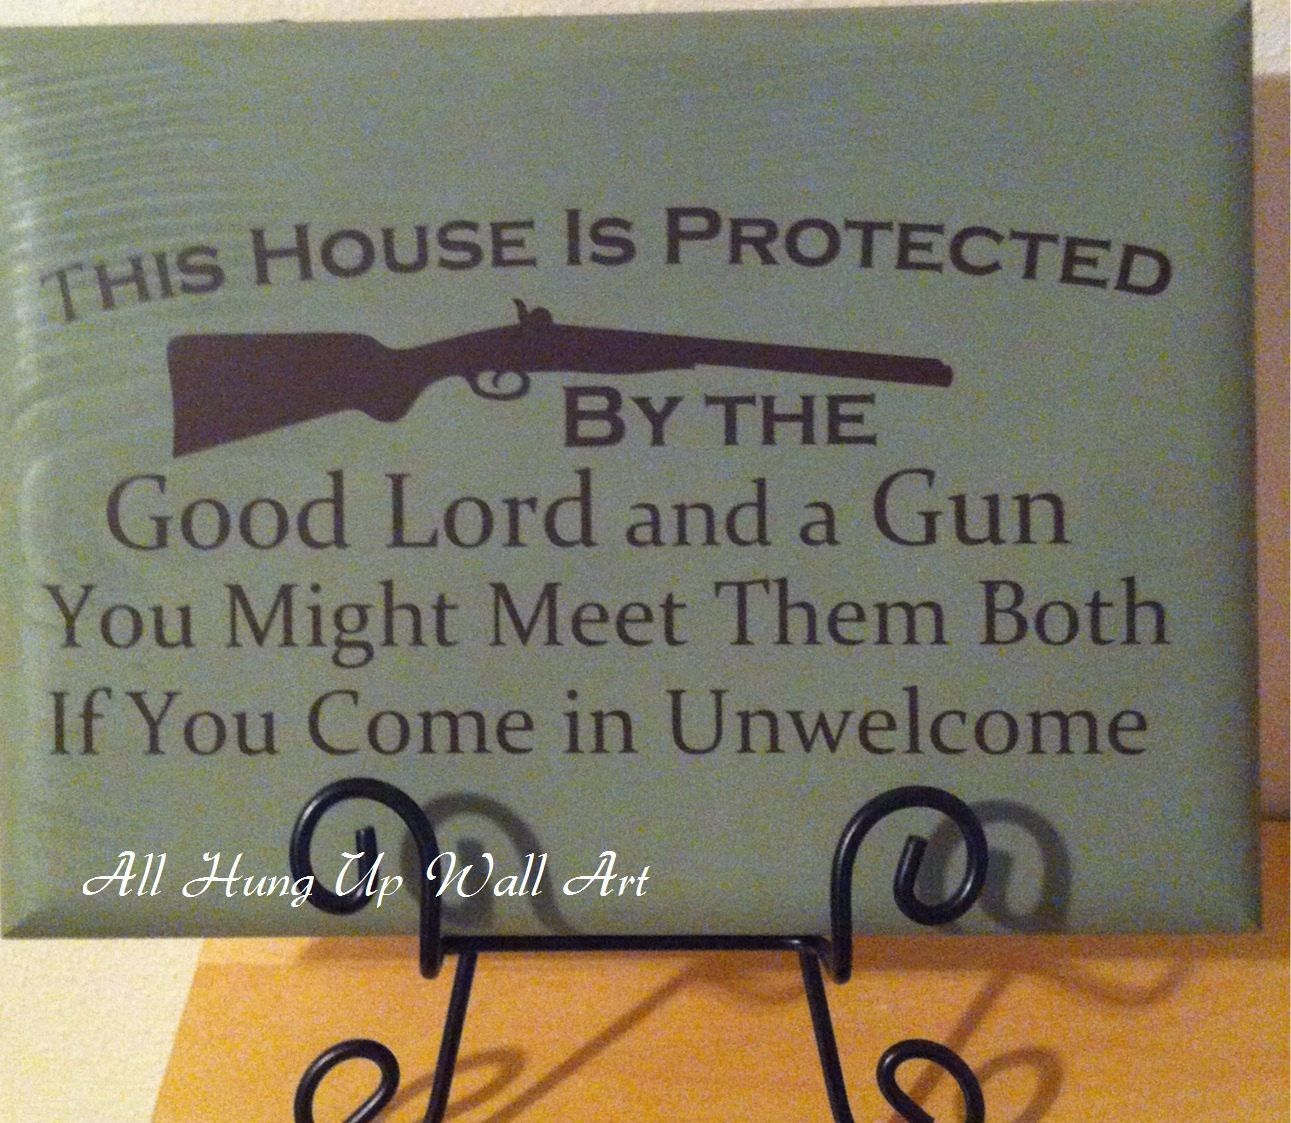 This house is protected by the Good Lord and a gun. You might meet them both if